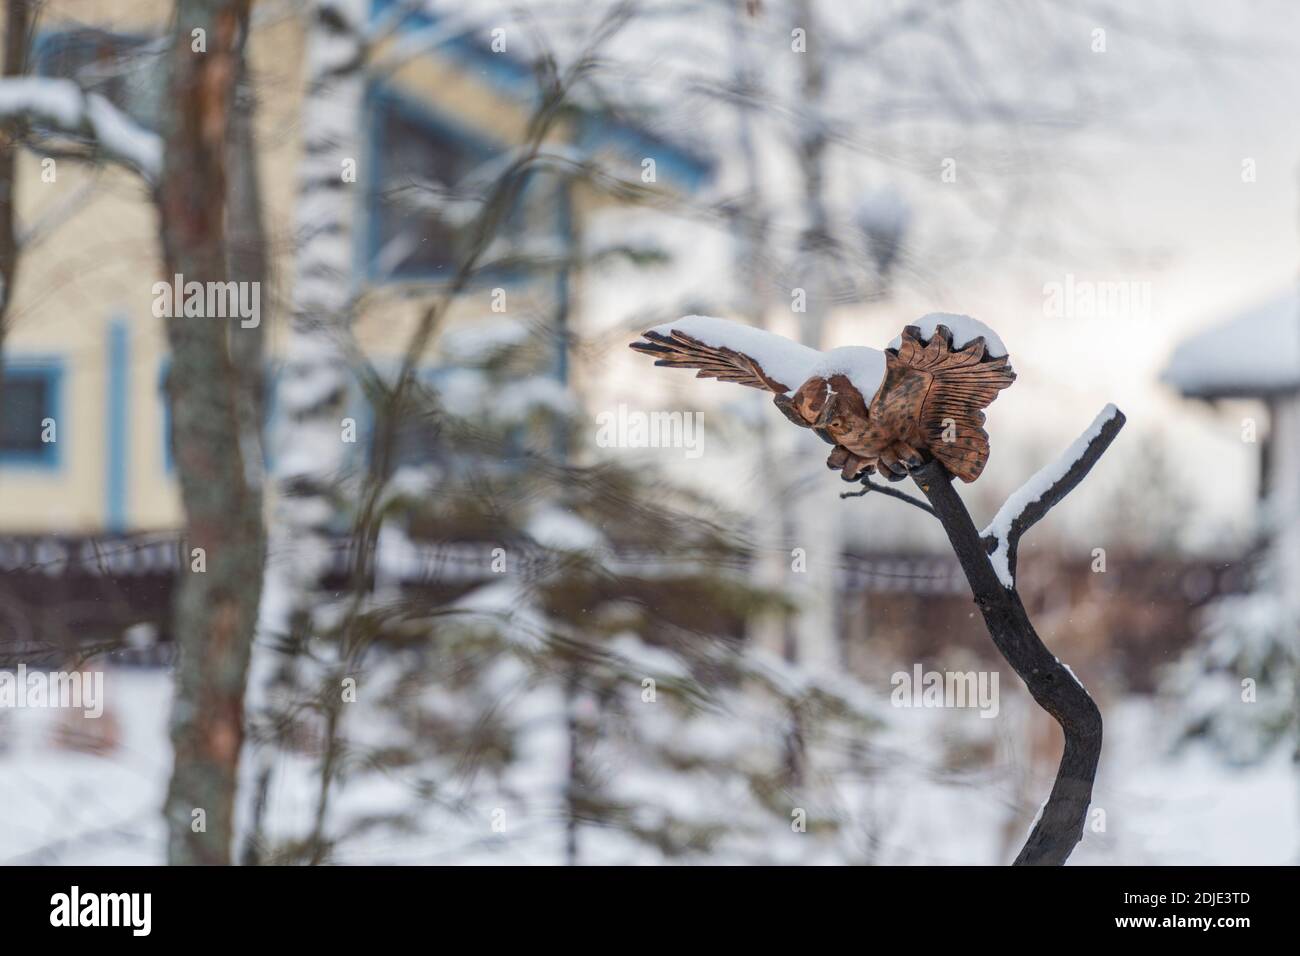 View Of Bird On Branch During Winter Stock Photo